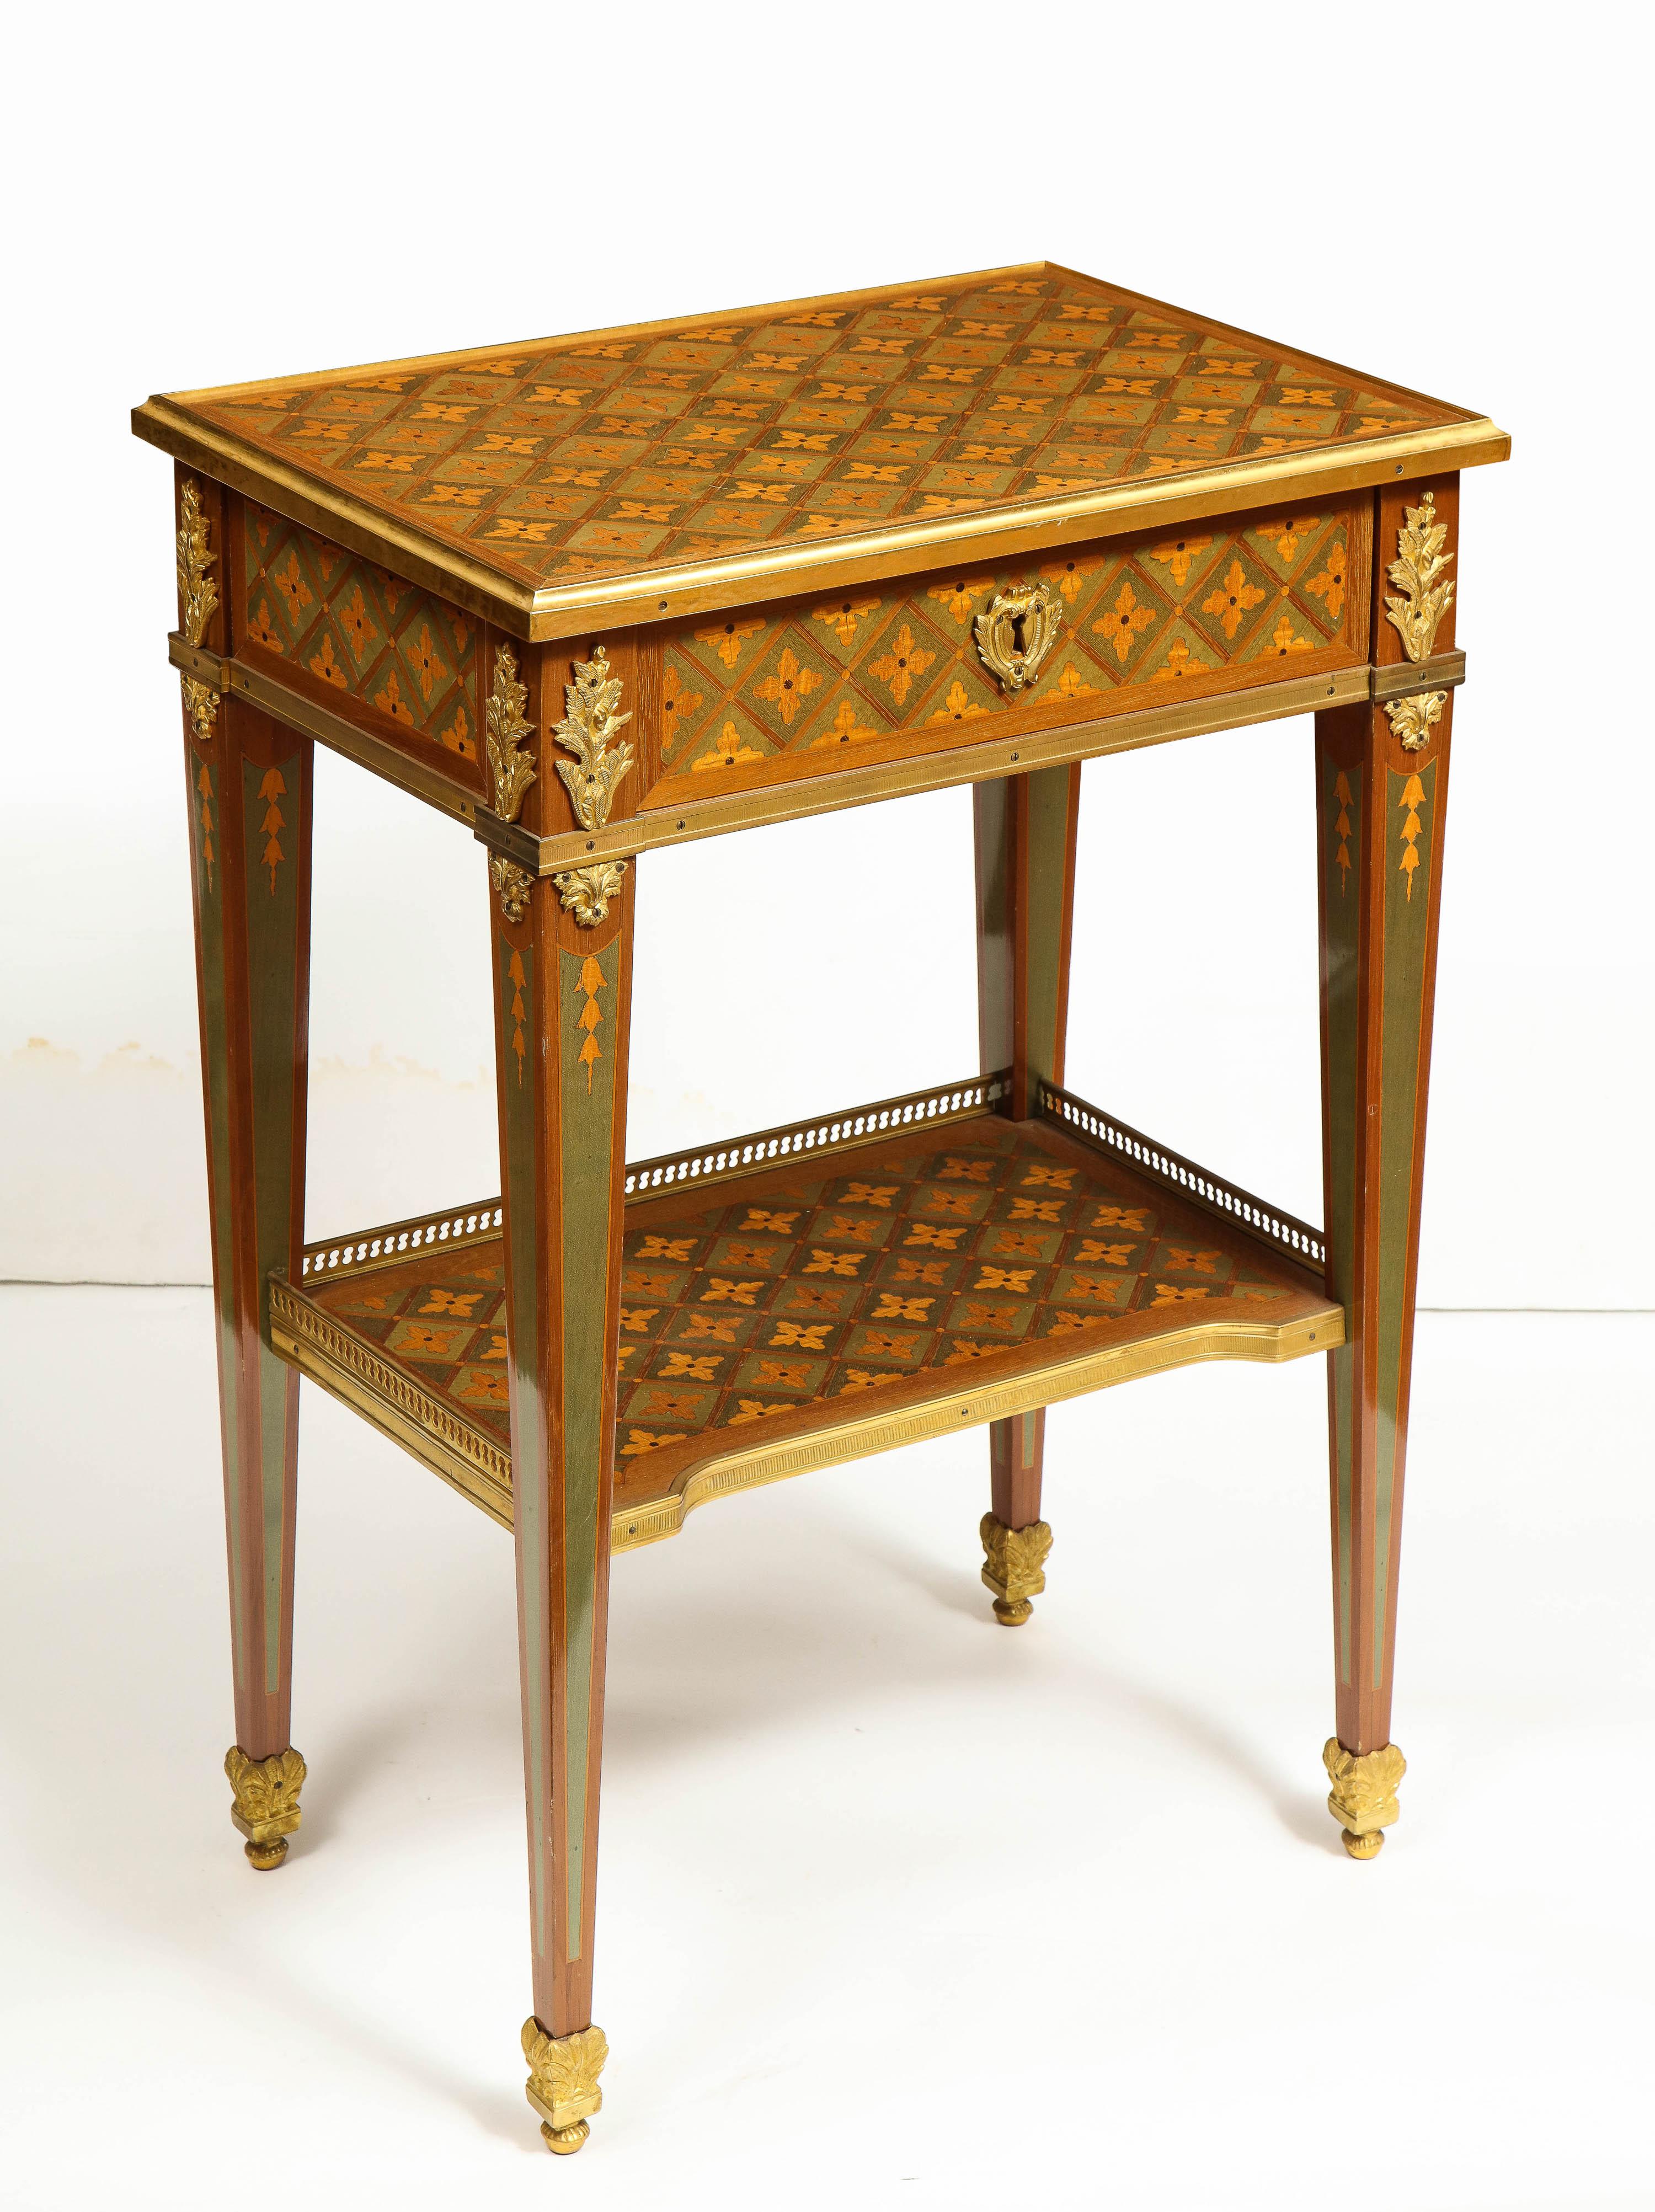 Exceptional Pair of French Ormolu-Mounted Parquetry and Marquetry Side Tables For Sale 10